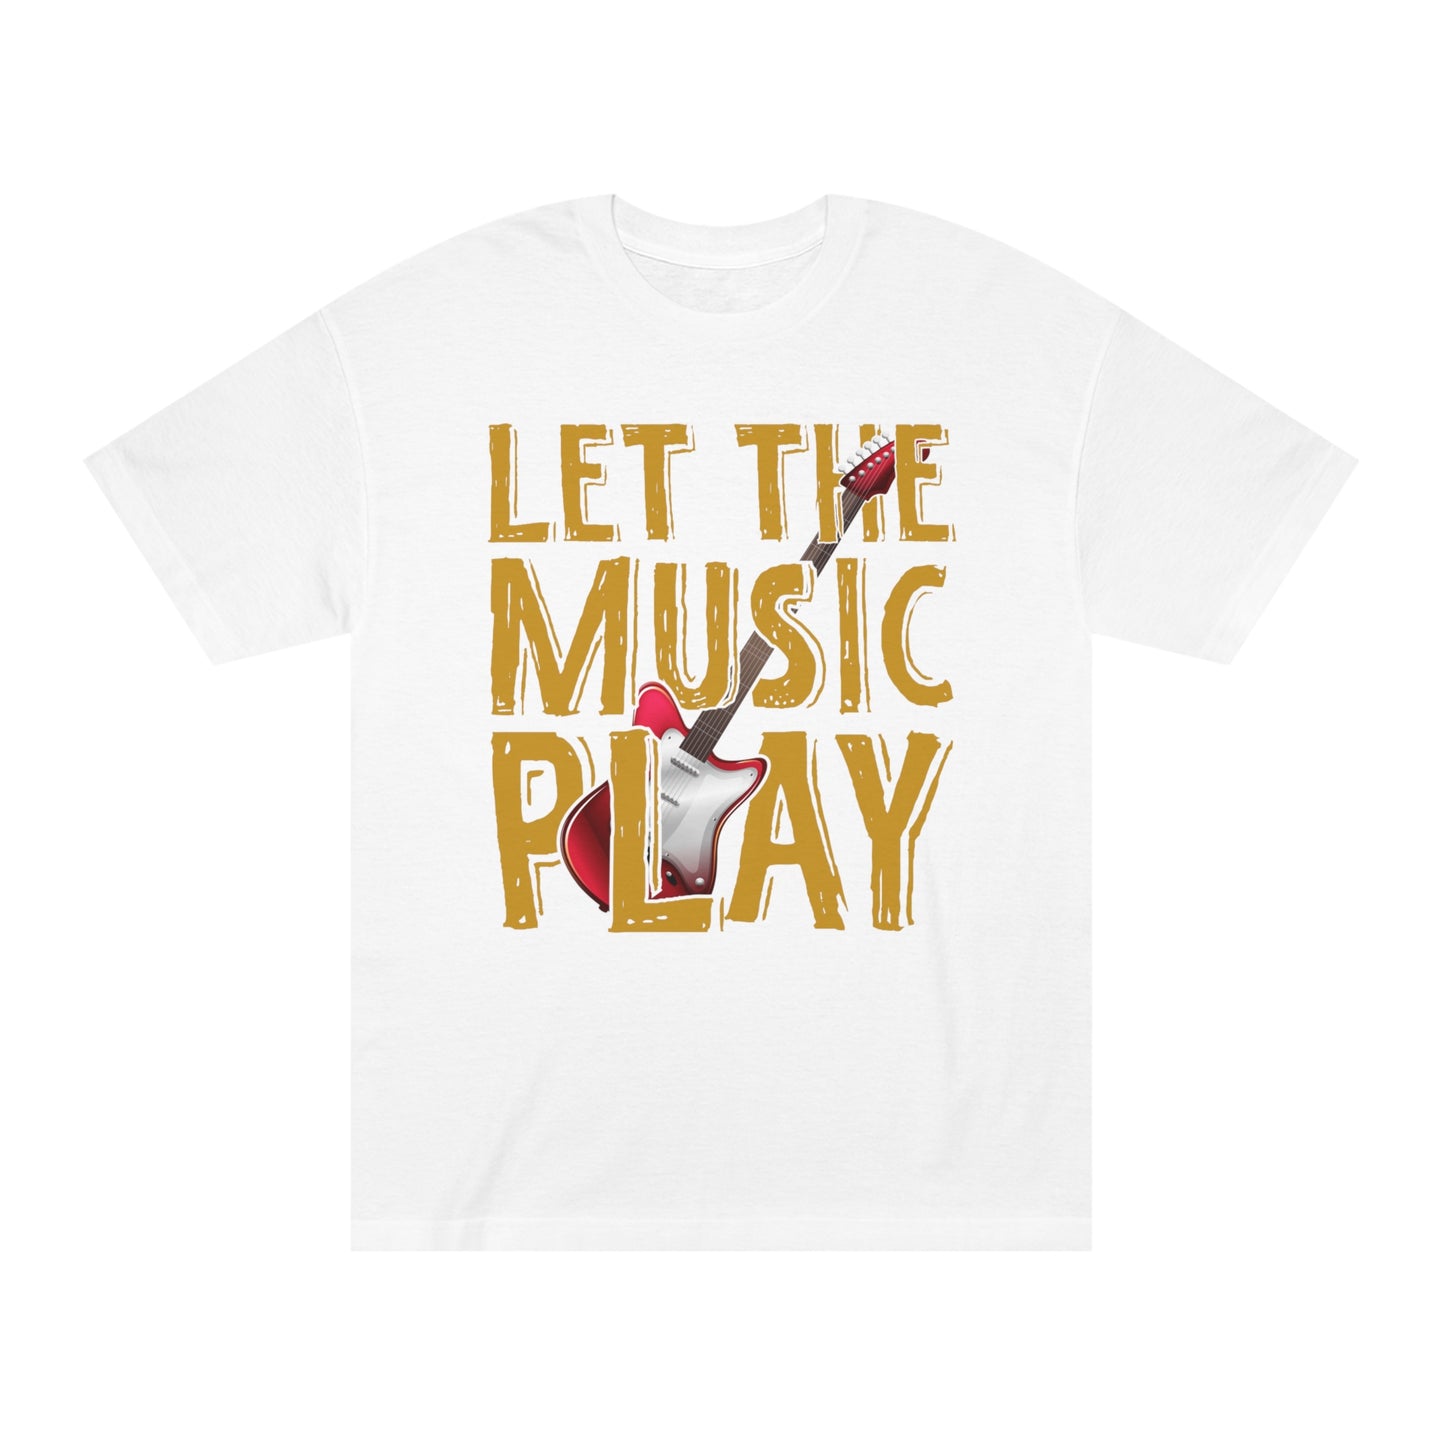 Let the music play Unisex Classic Tee